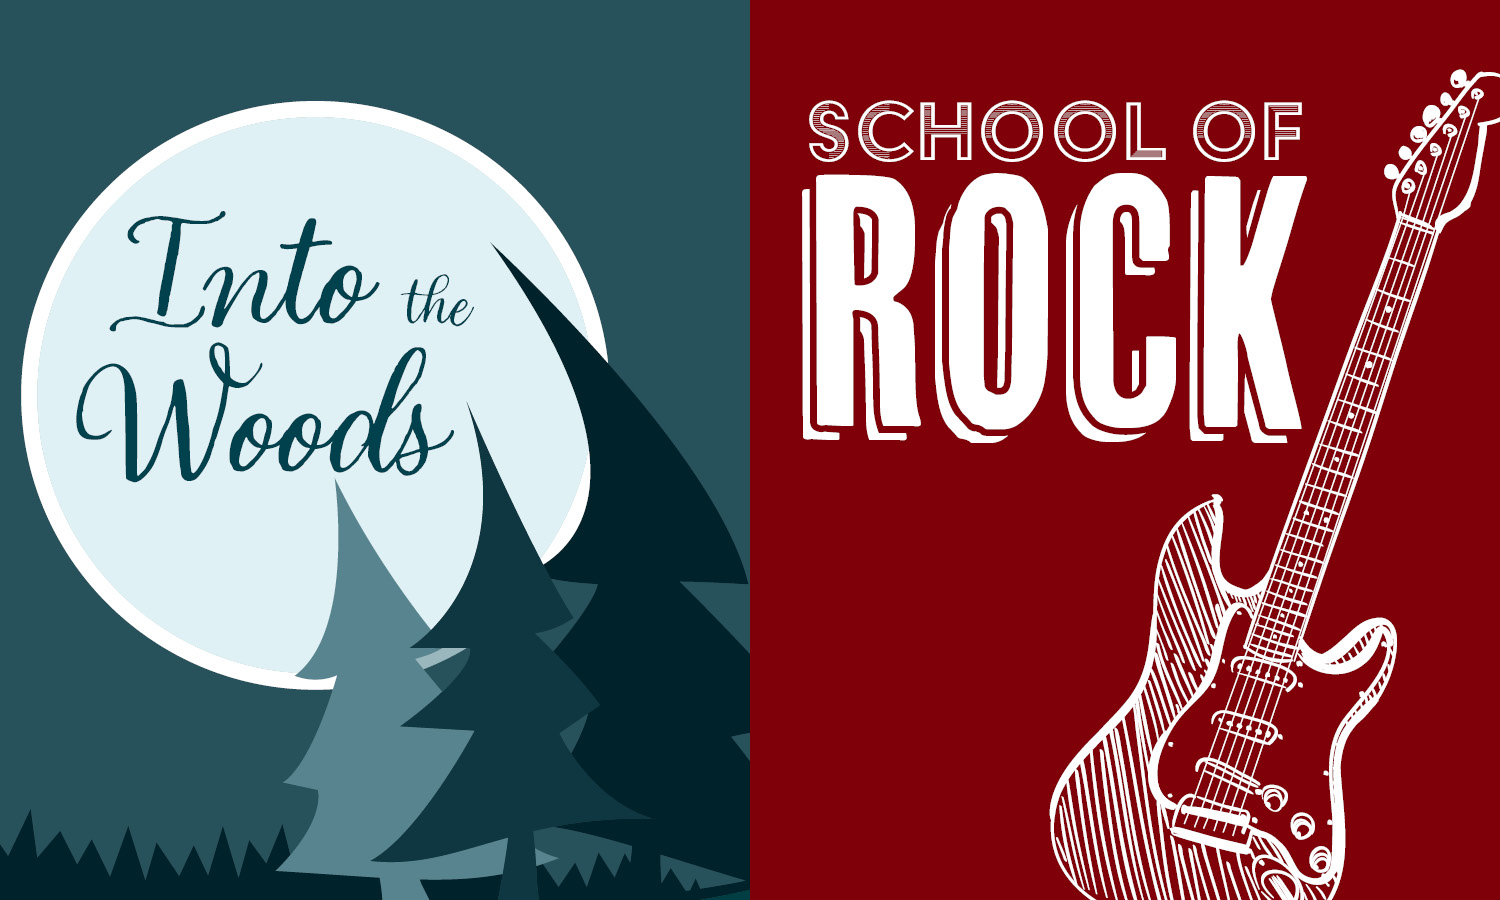 Illustration of moon and forest, text on moon says Into the Woods. Illustration of electric guitar, text says School of Rock